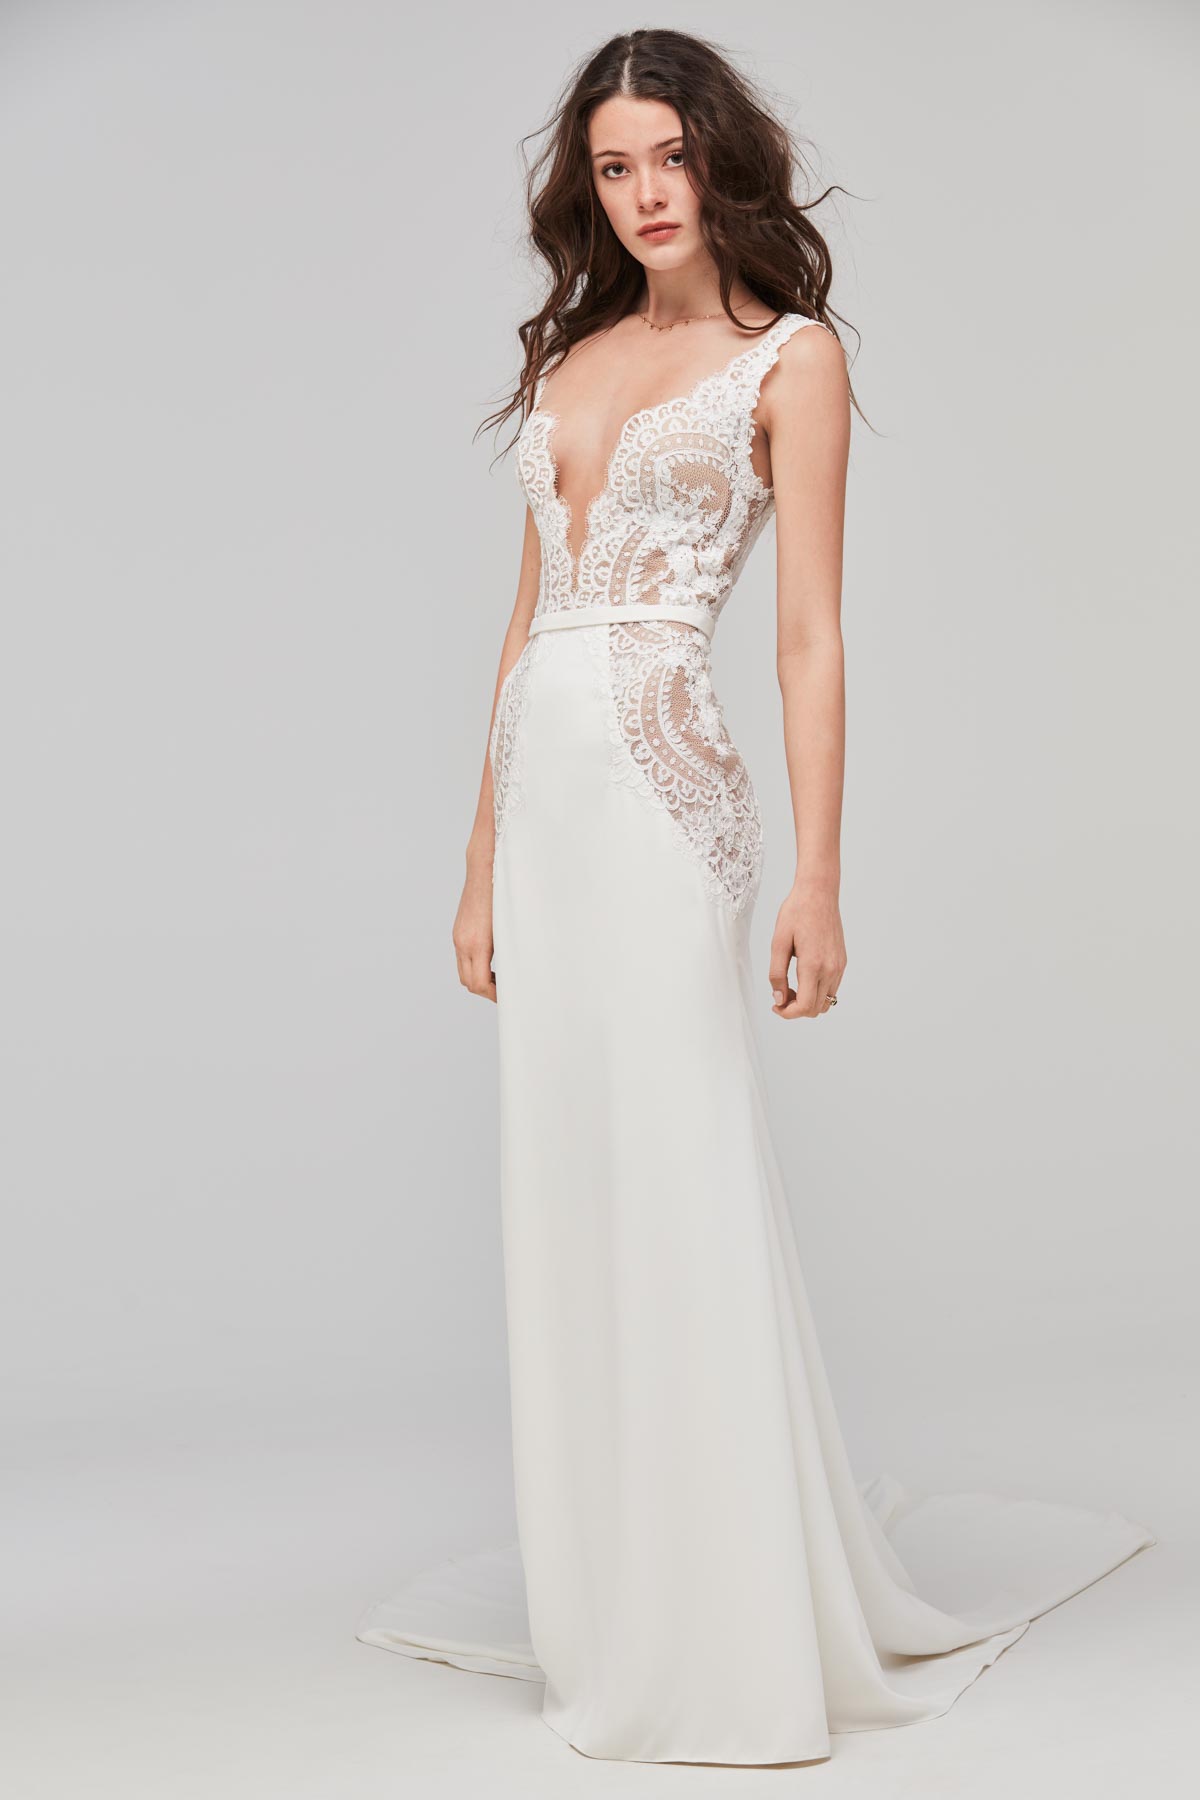 Lief (Unlined) 59420 | Willowby Brides ...